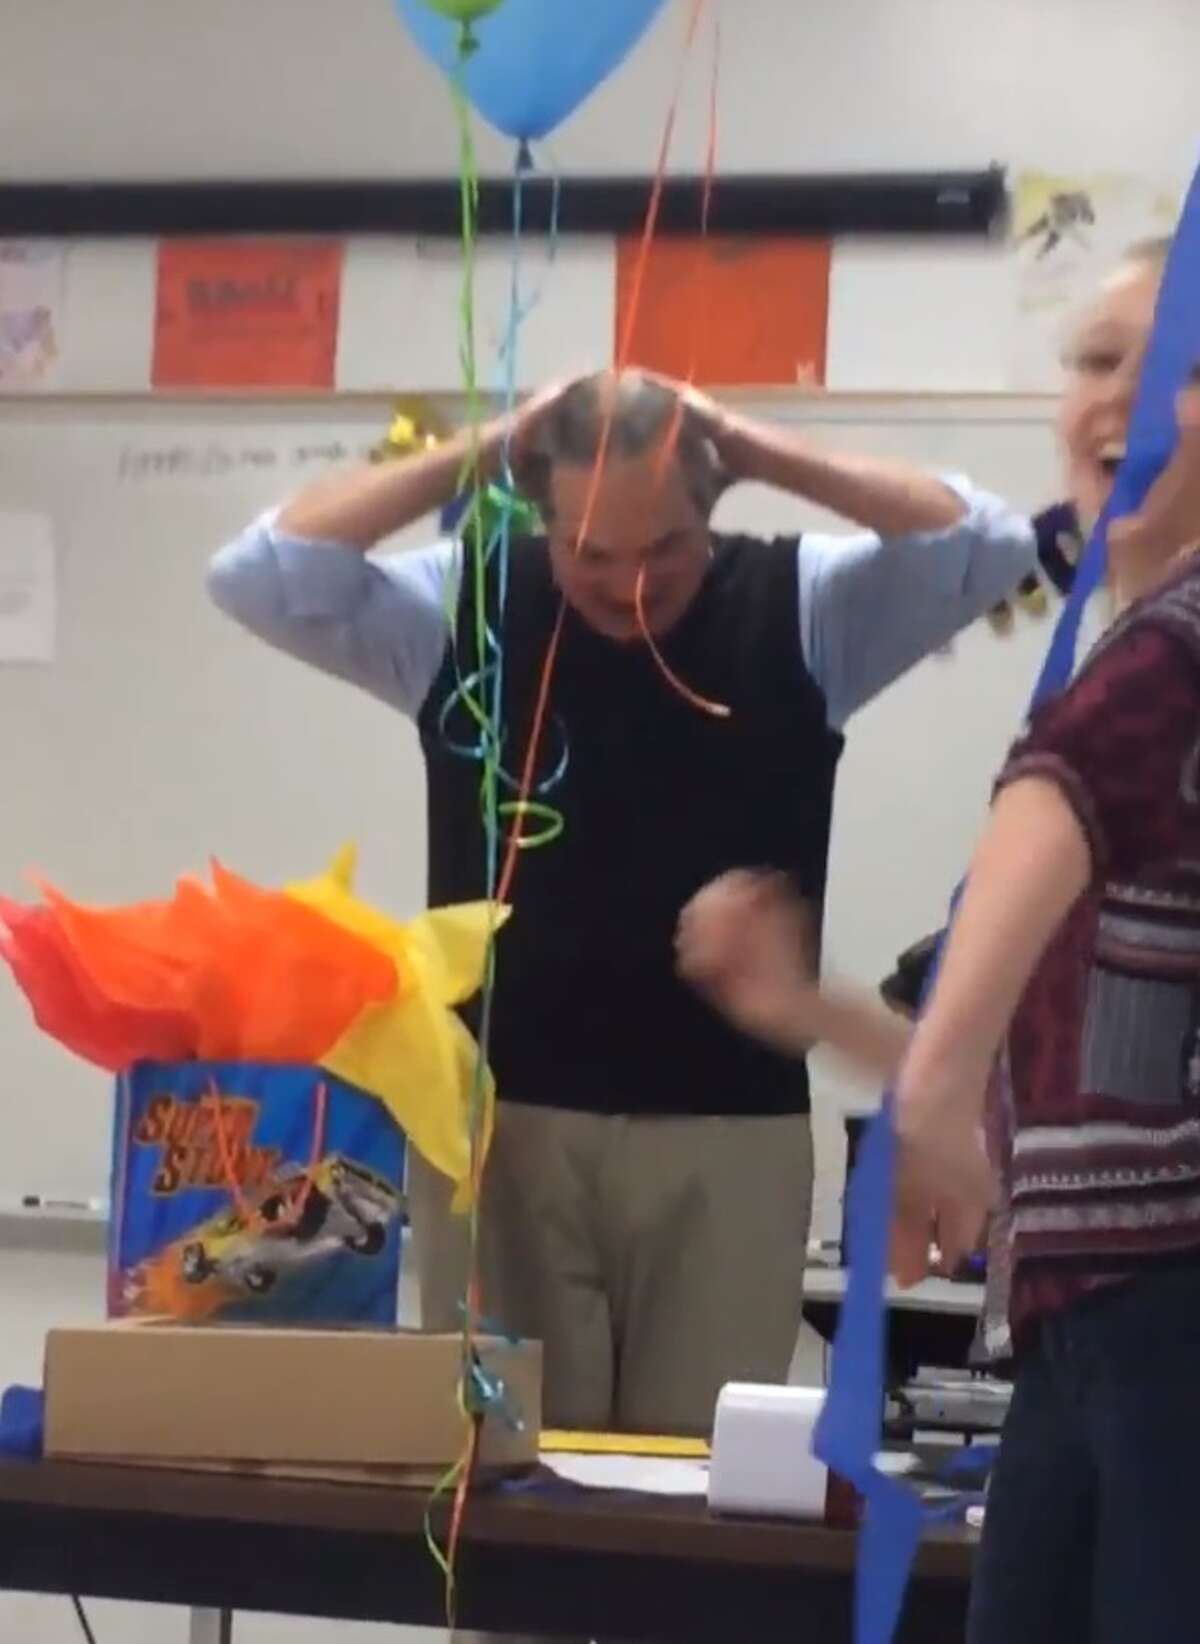 Teachers are usually the ones with classroom surprises up their sleeves, but in Burleson, it was the students who caught their teacher off guard with a surprise birthday party that has warmed the hearts of thousands on social media.